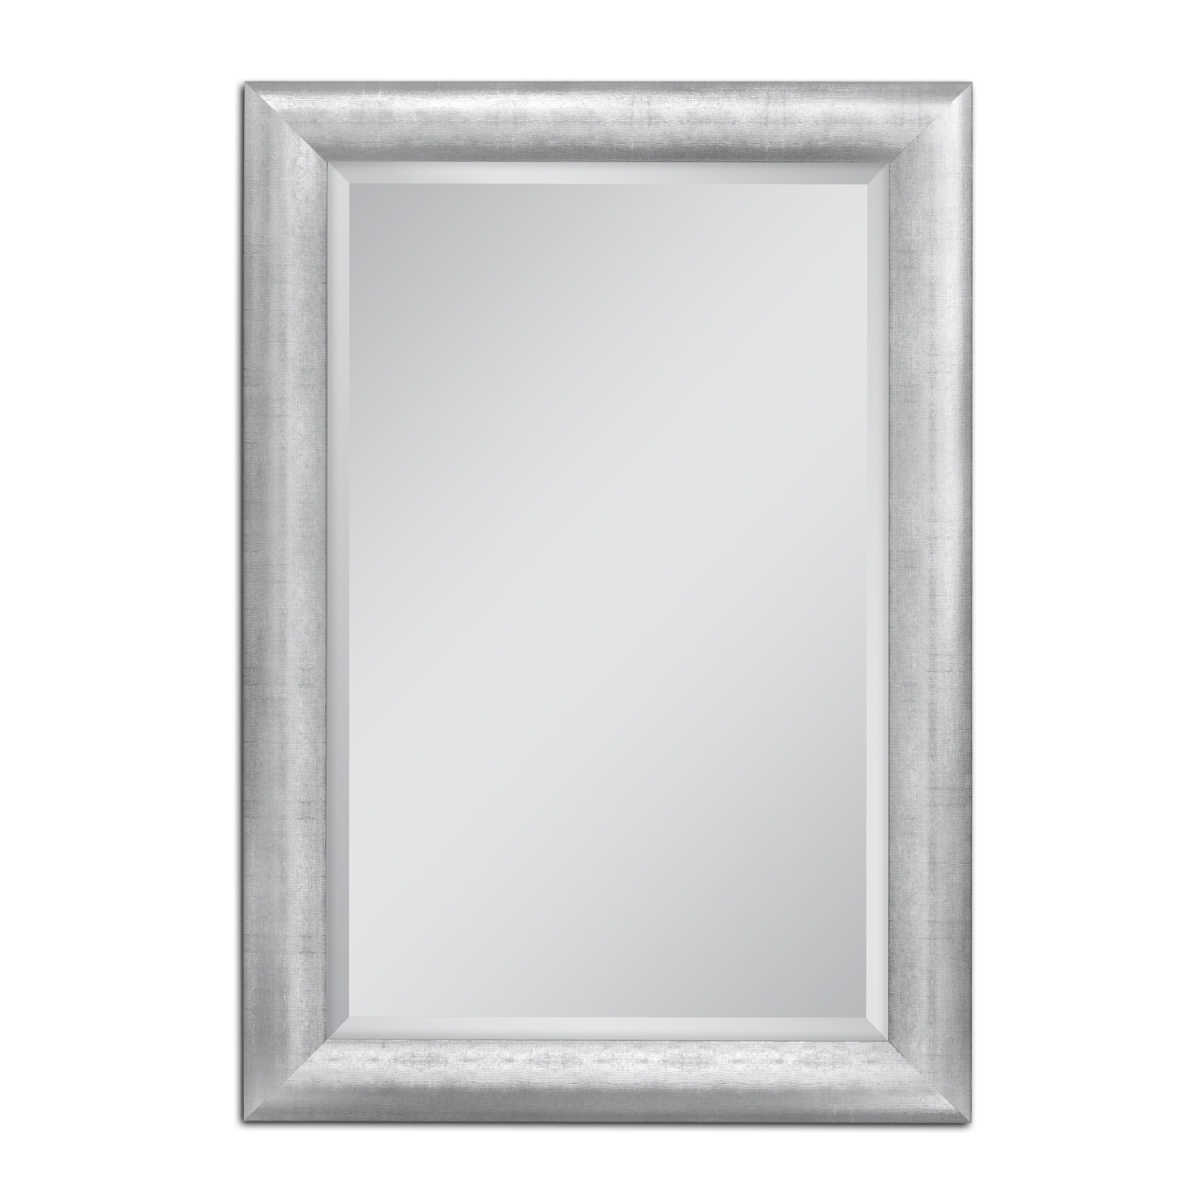 Head West 8110 30 X 42 In. Pave Weave Wall Mirror Chrome